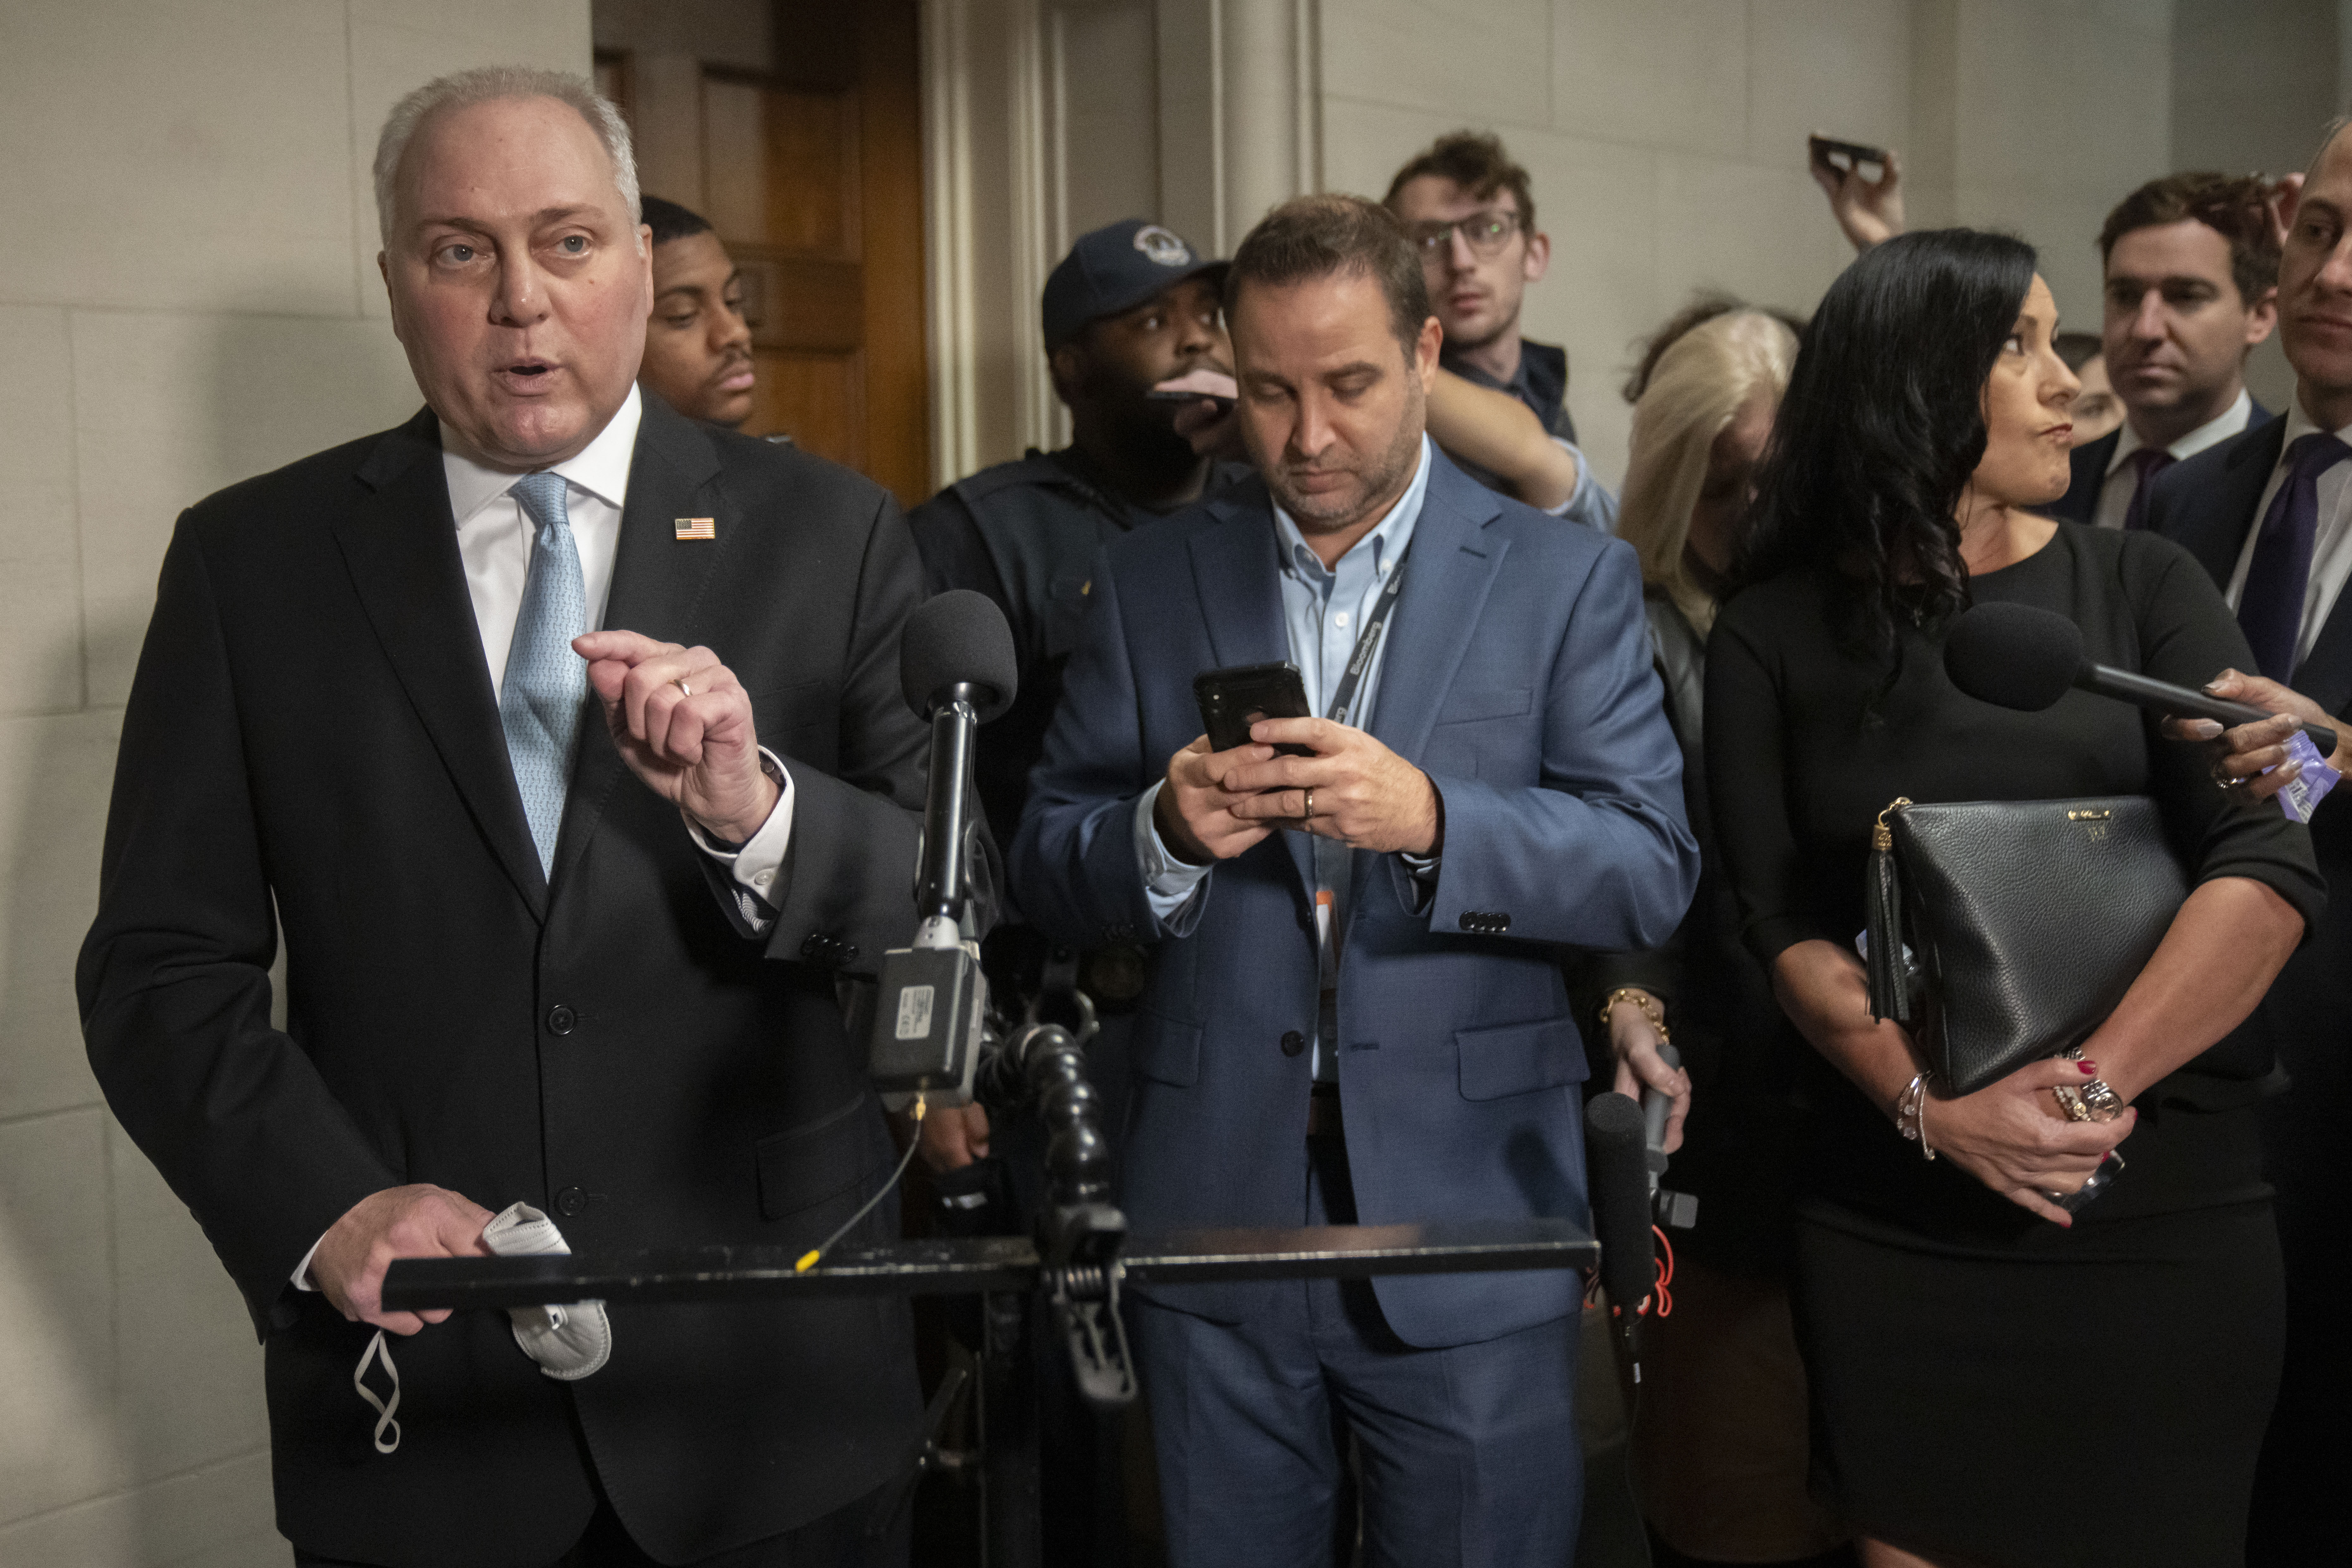 Steve Scalise nominated as House speaker candidate by GOP lawmakers